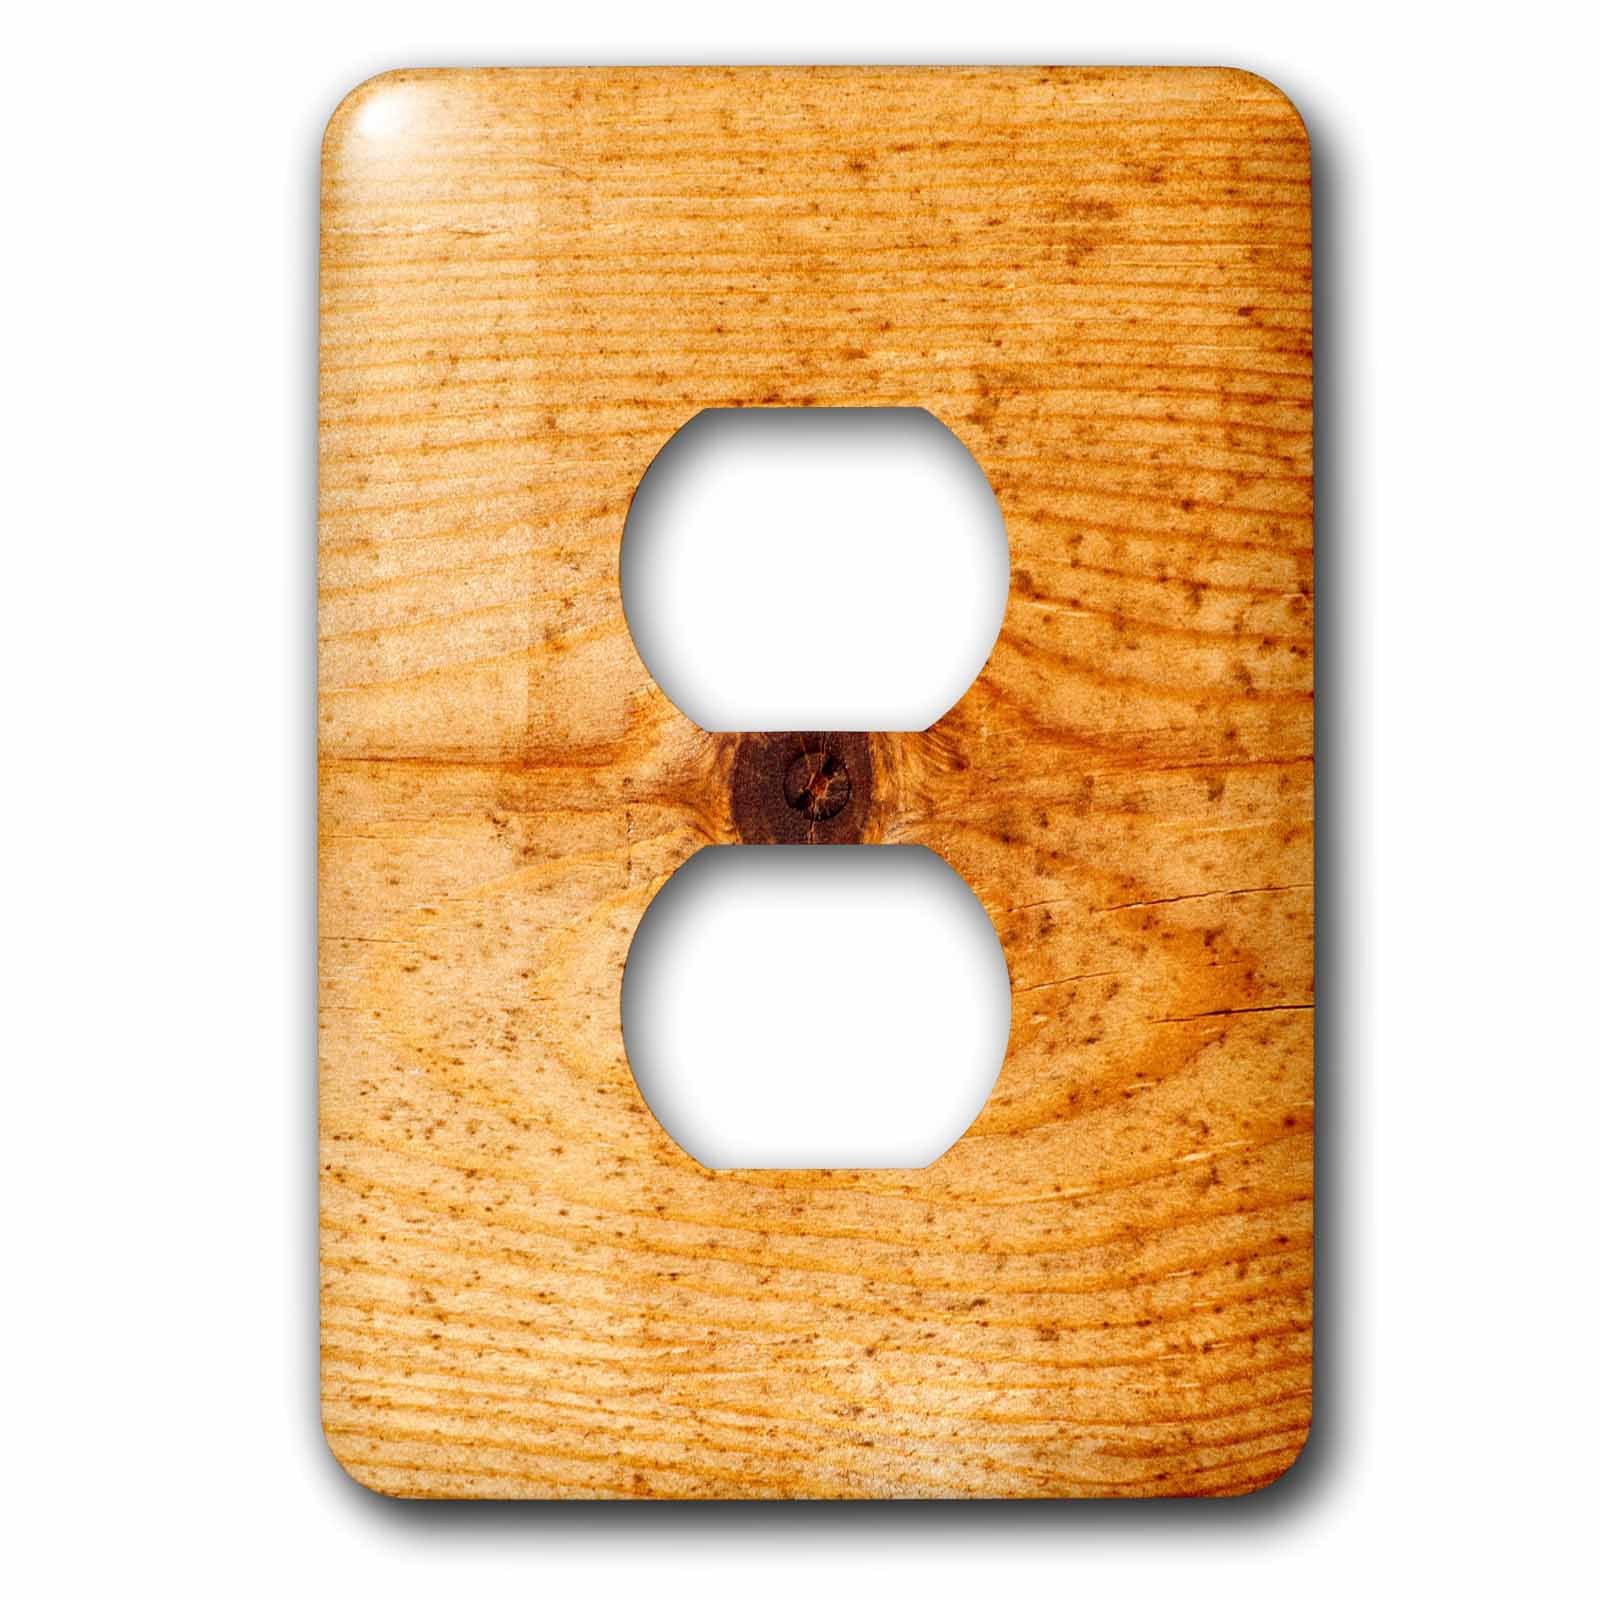 3dRose lsp_270930_1 Single Toggle Switch Colorful wooden texture with a knot in the center 